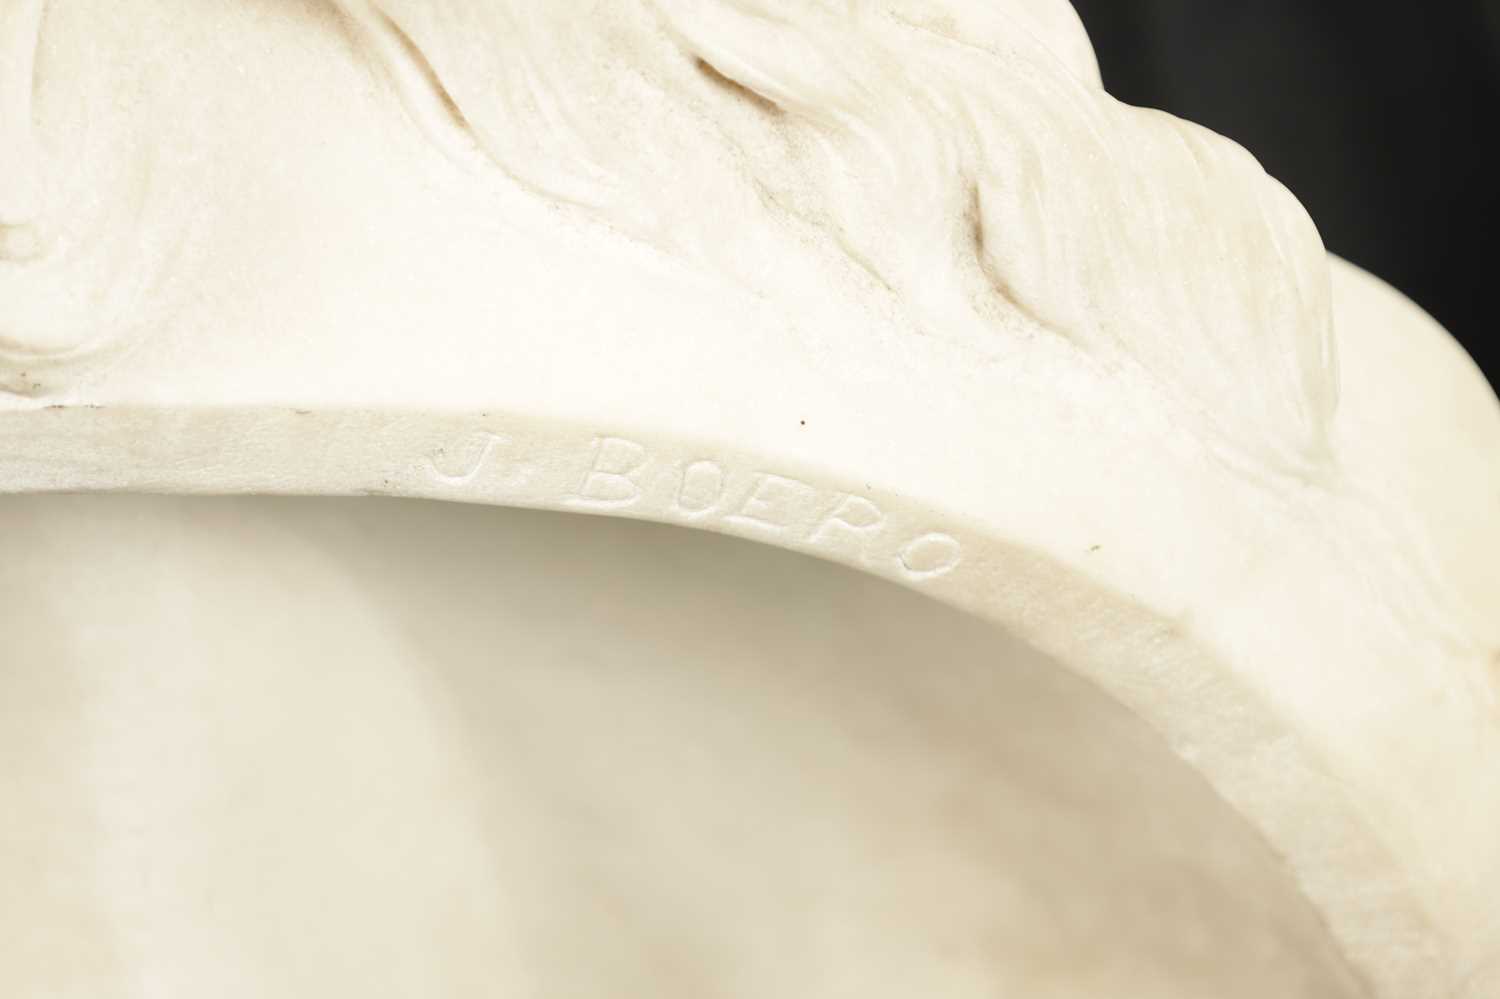 JACQUES BOERO. A 19TH CENTURY CARVED CARRERA MARBLE ITALIAN BUST - Image 5 of 5